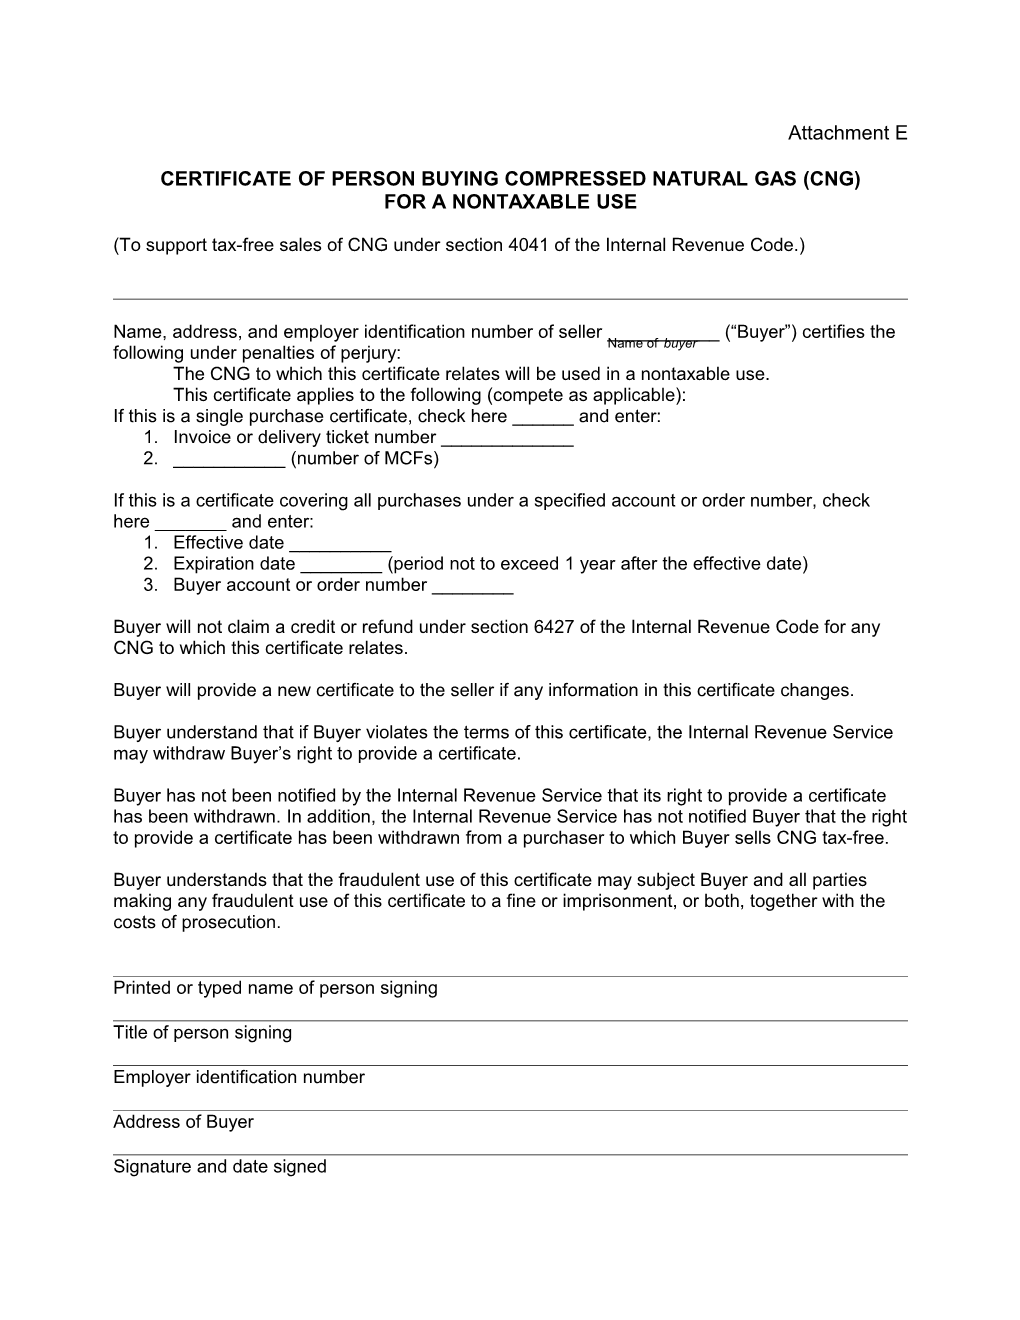 Certificate of Person Buying Compressed Natural Gas (Cng)